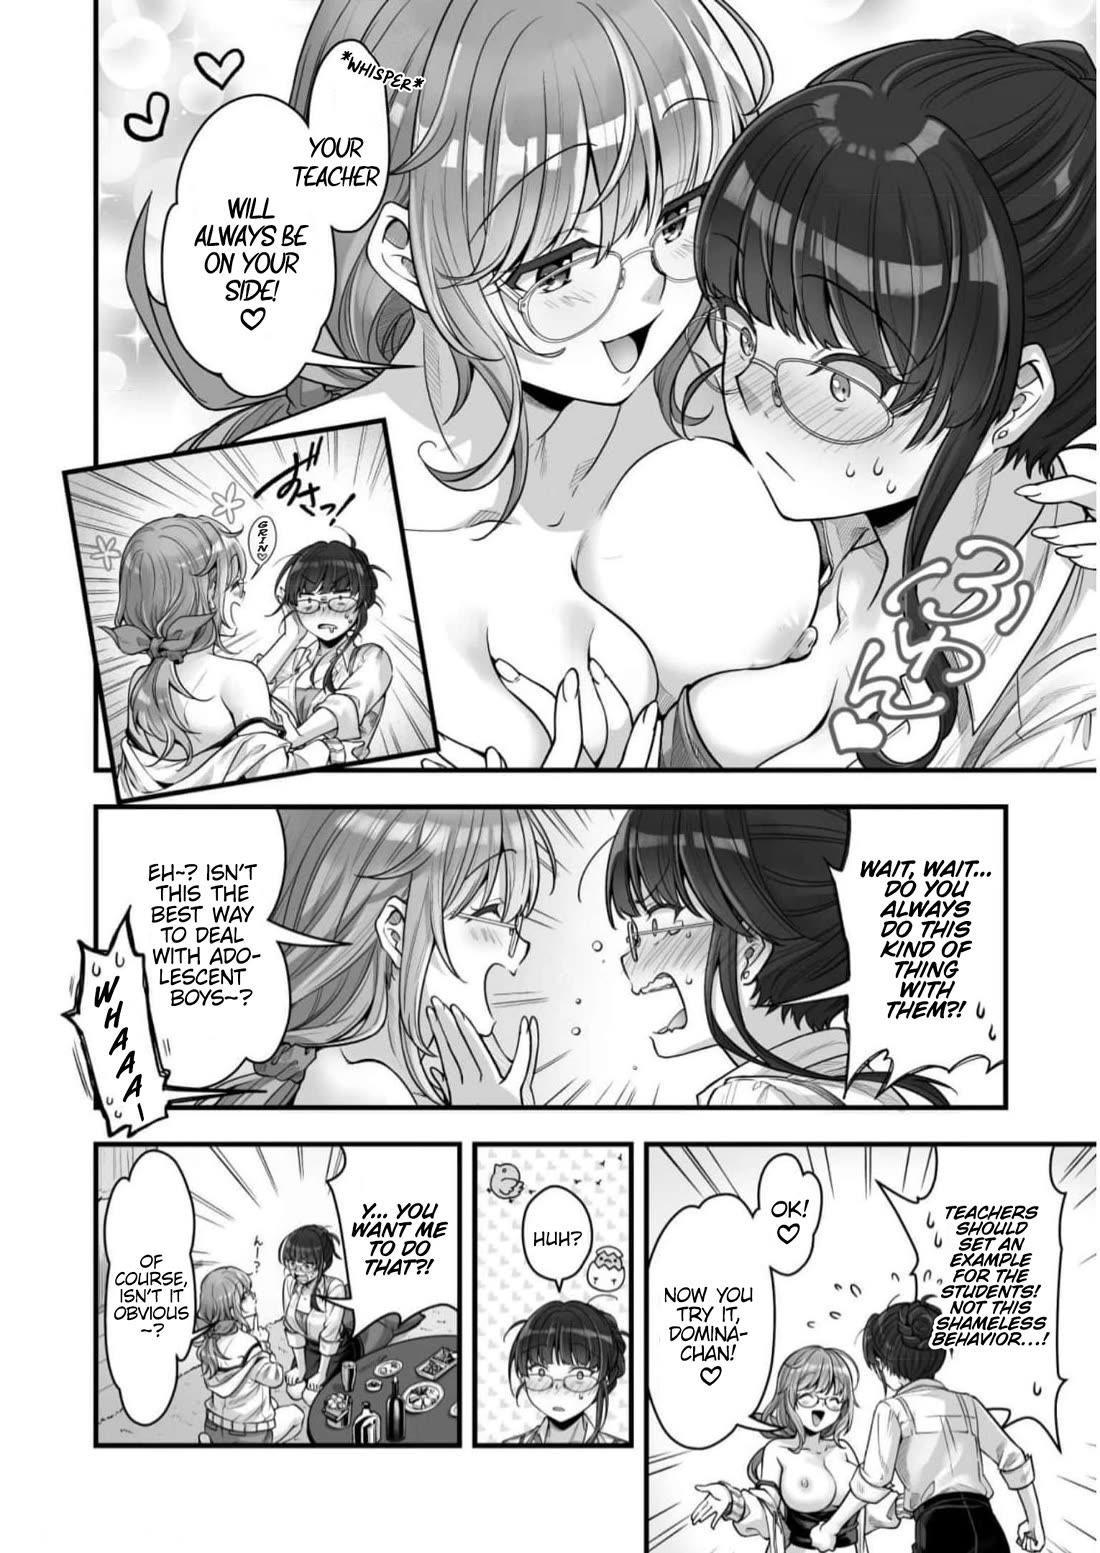 When I Was Playing Eroge With VR, I Was Reincarnated In A Different World, I Will Enslave All The Beautiful Demon Girls ~Crossout Saber~ Chapter 16.5 - Page 6